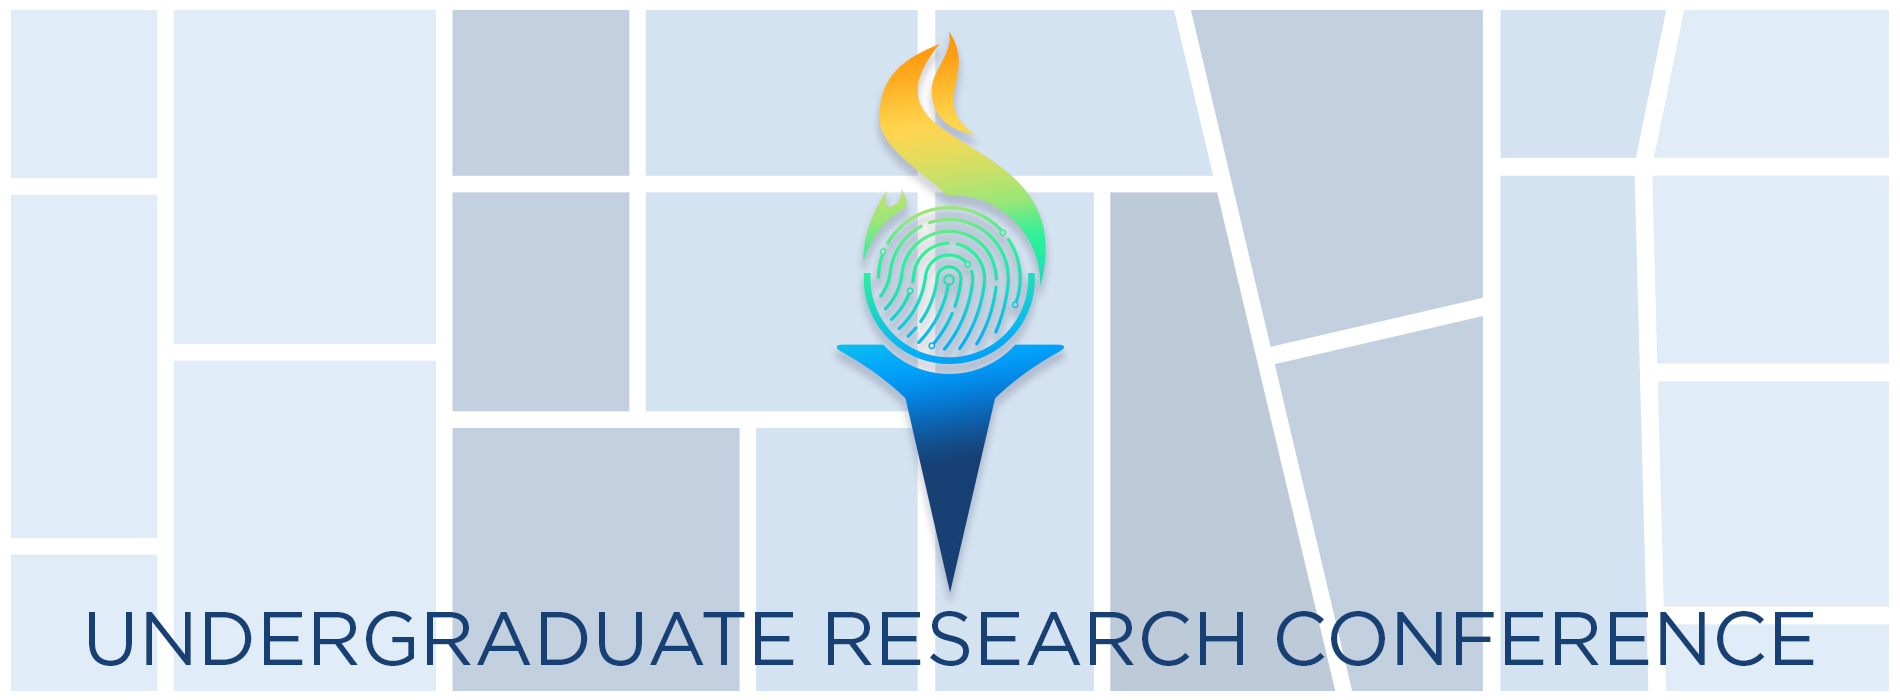 conference logo with a multi-colored fingerprint inside a torch with a greyish blue window-pane background